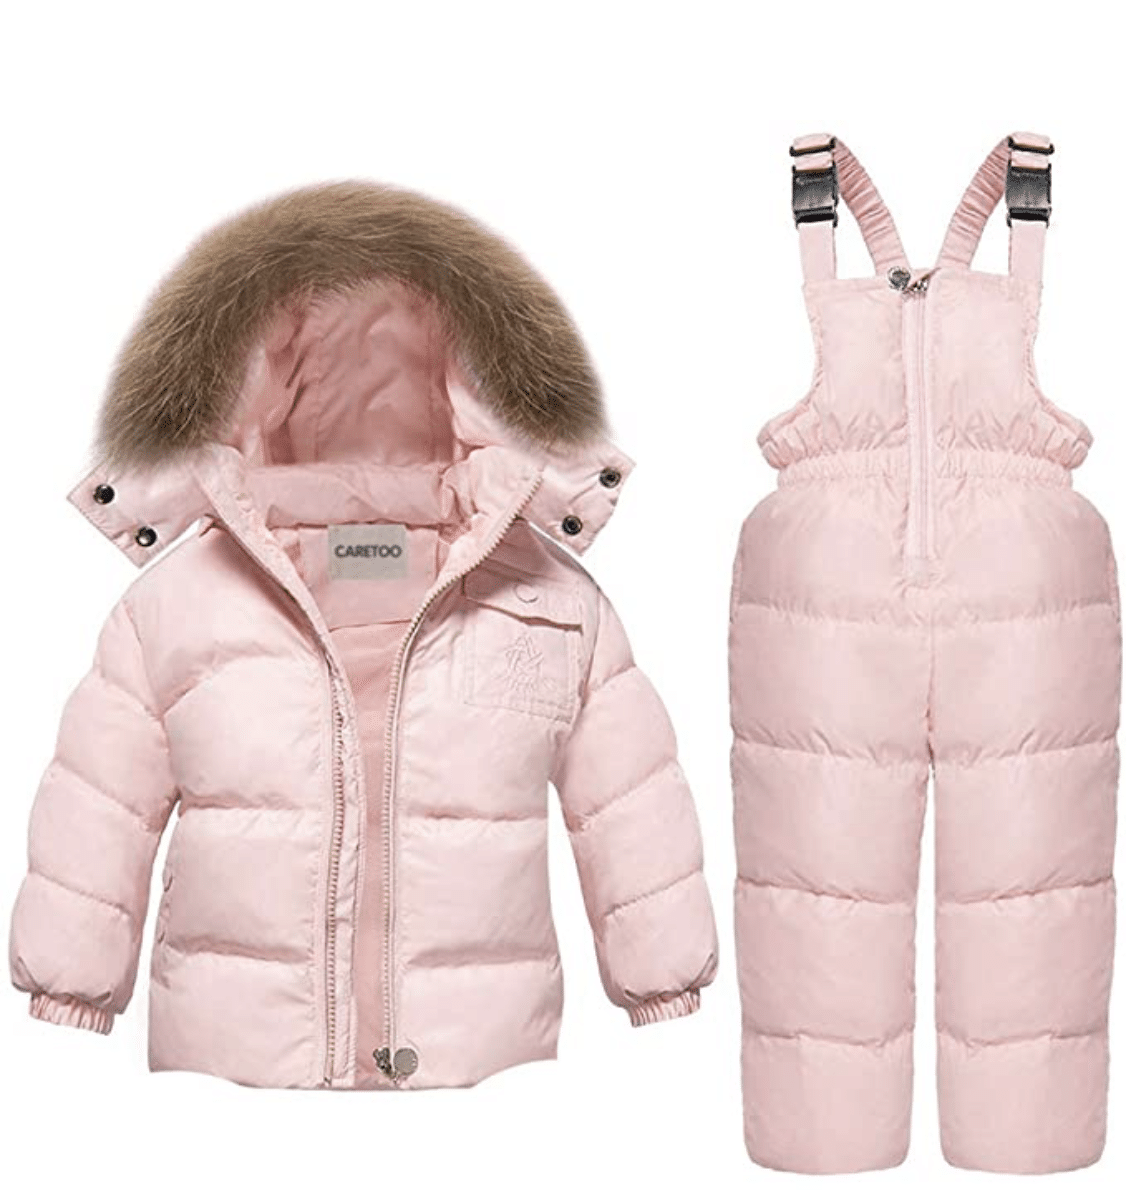 Best Baby Snowsuits for 2023 - The Cards We Drew